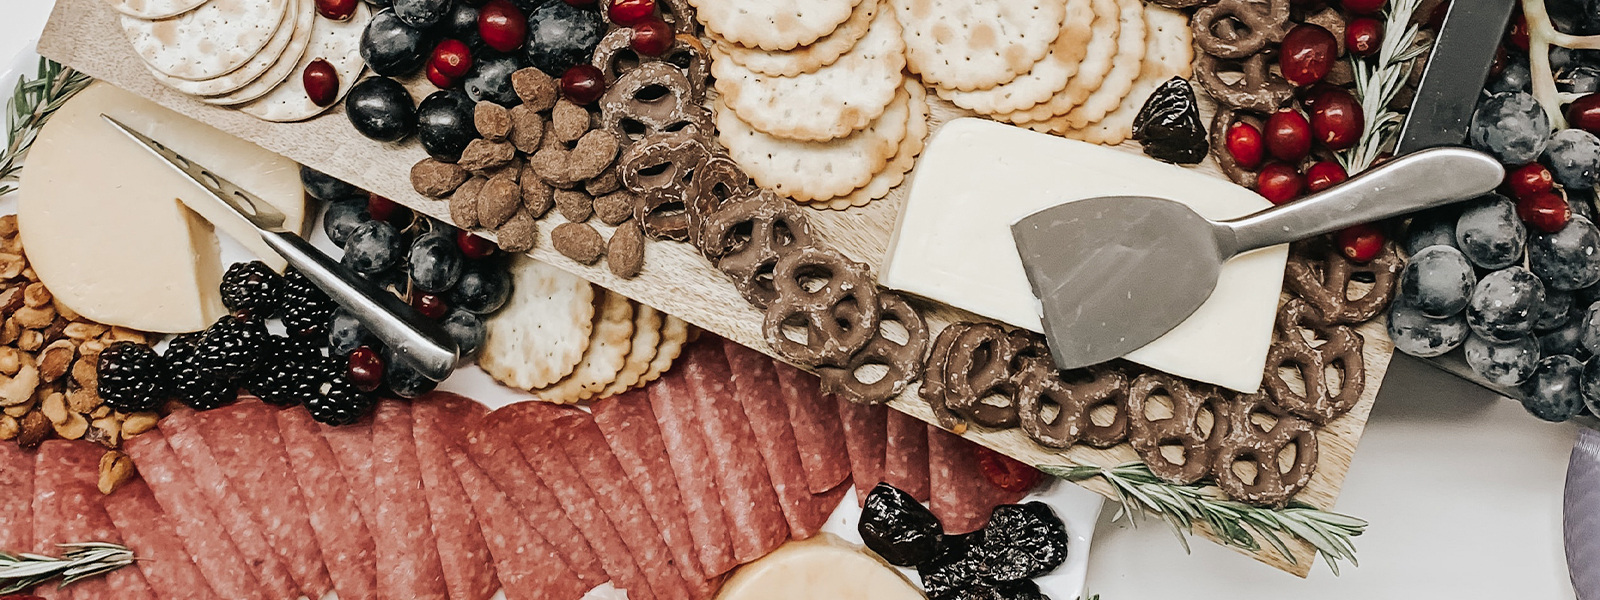 Alexian: Our Guide to a Festive Charcuterie Board